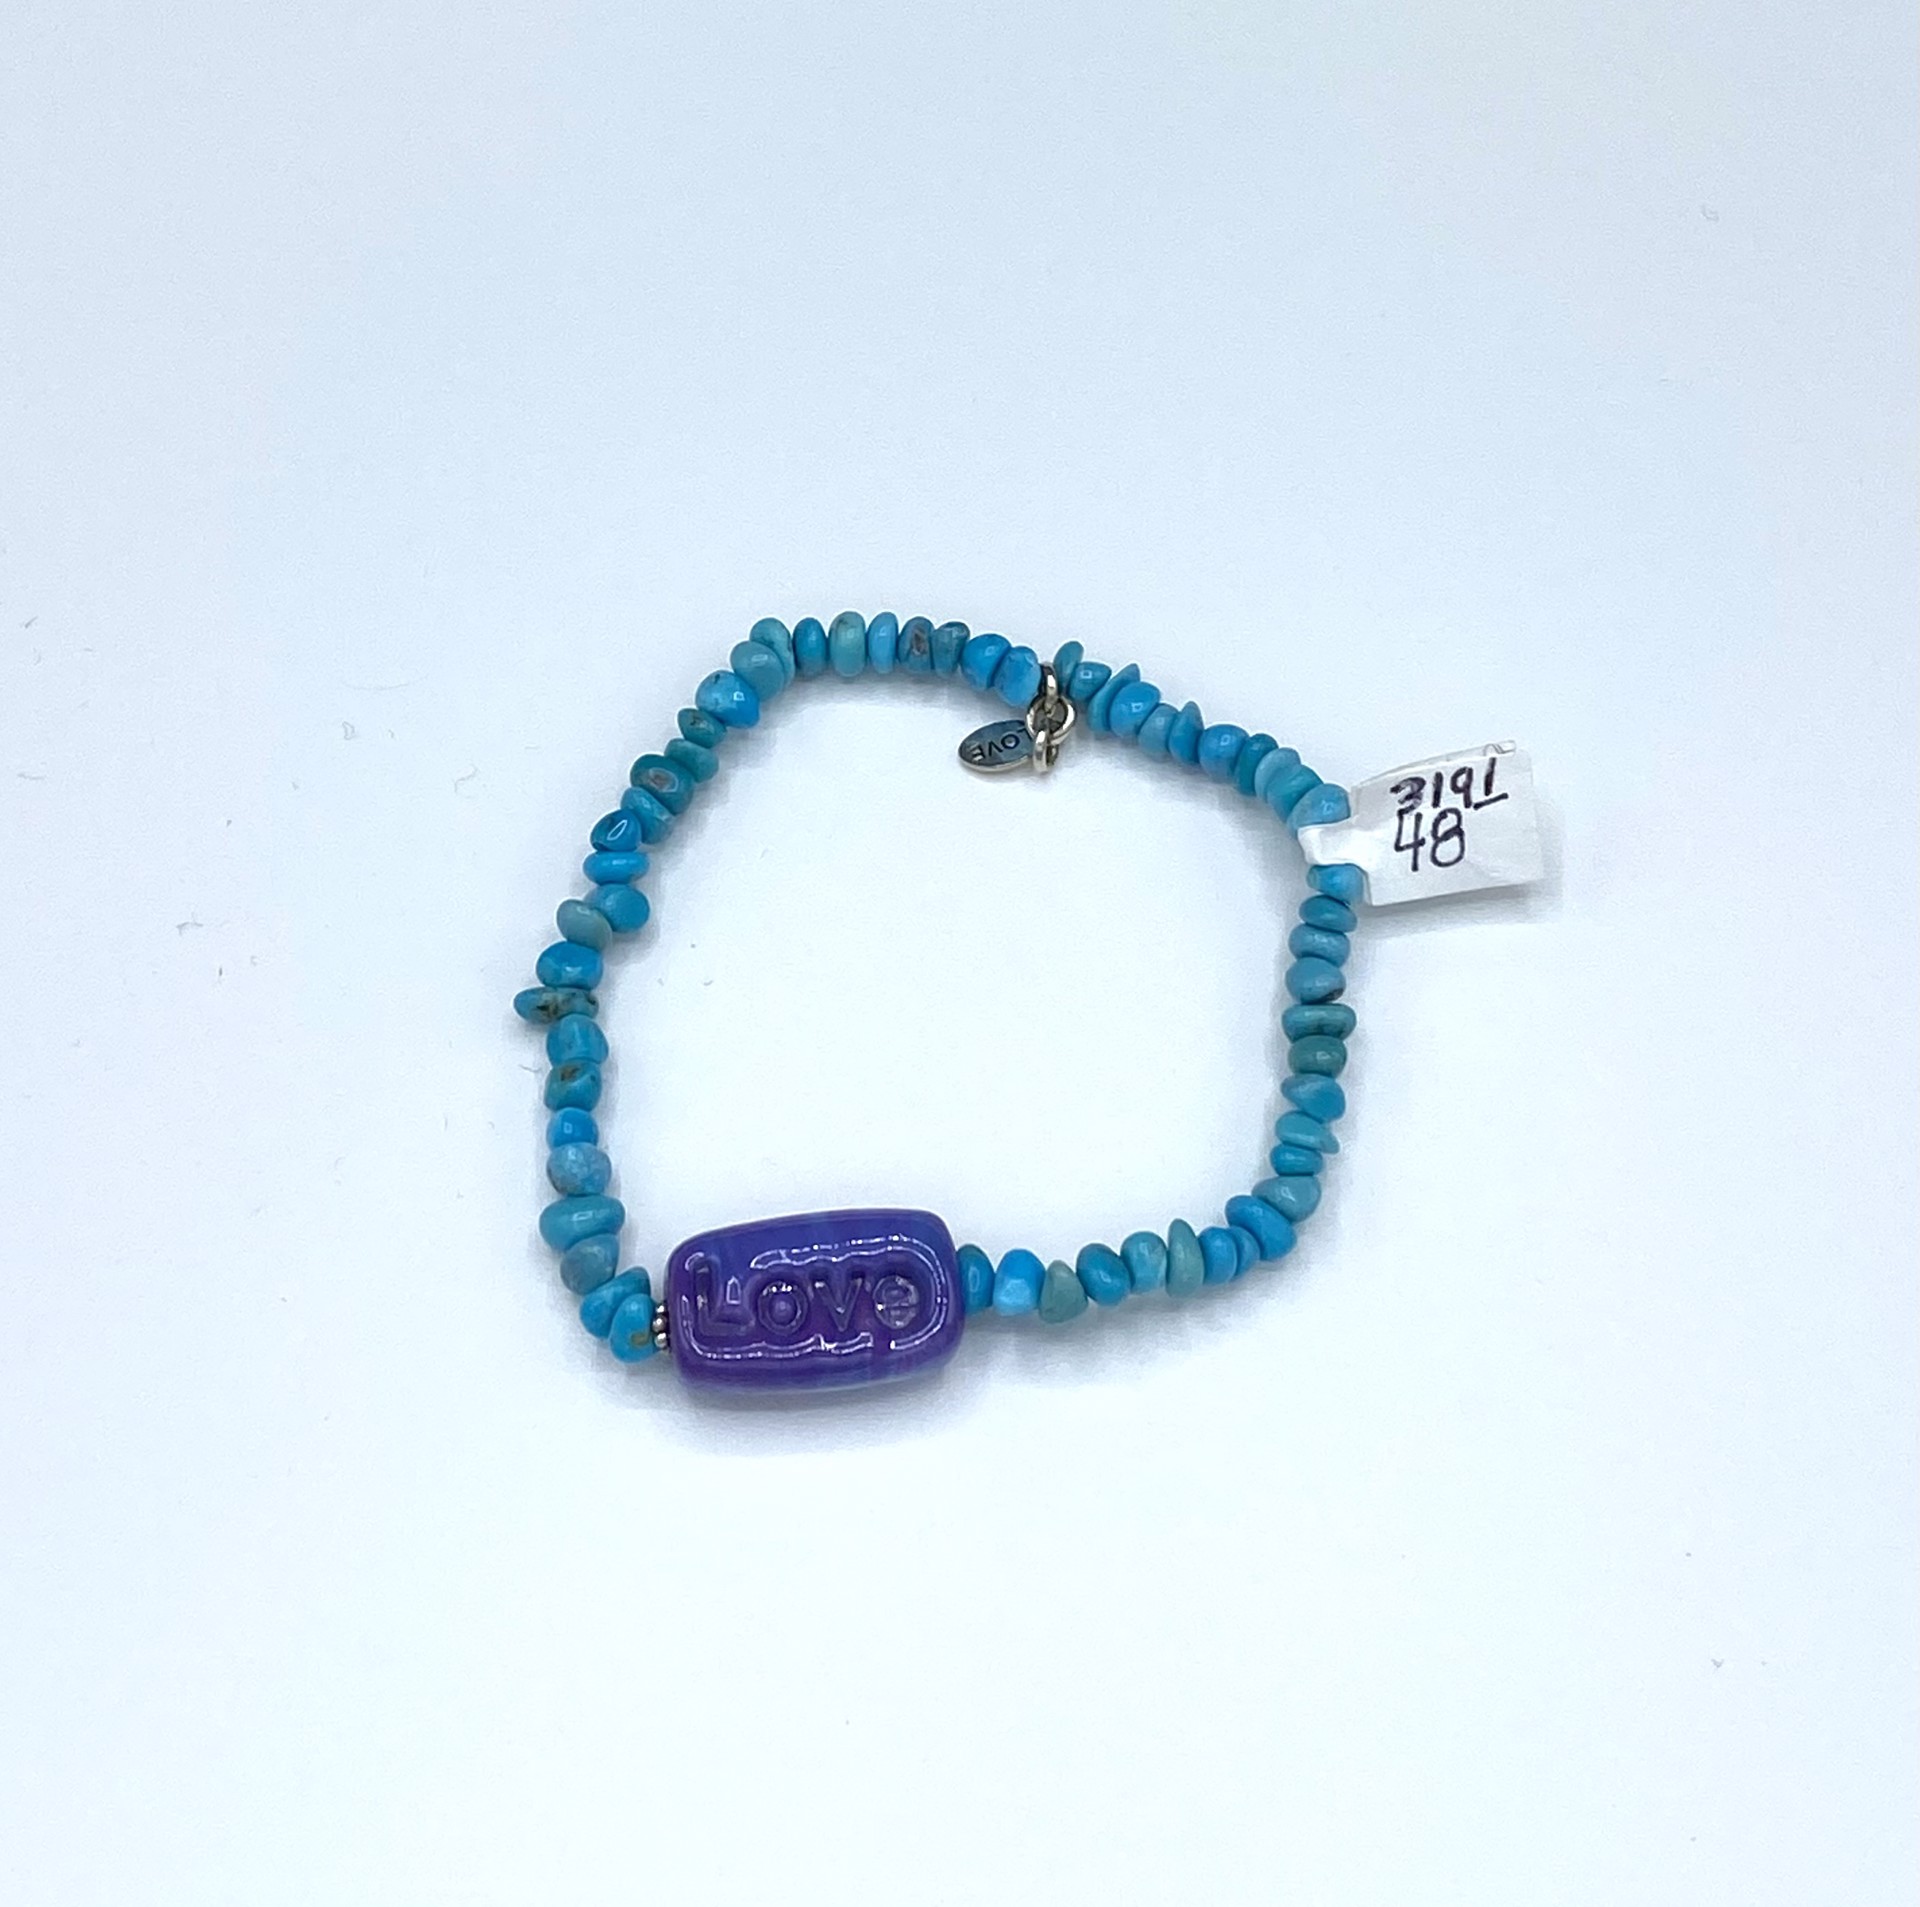 Turquoise and Glass Love Bracelet by Emelie Hebert